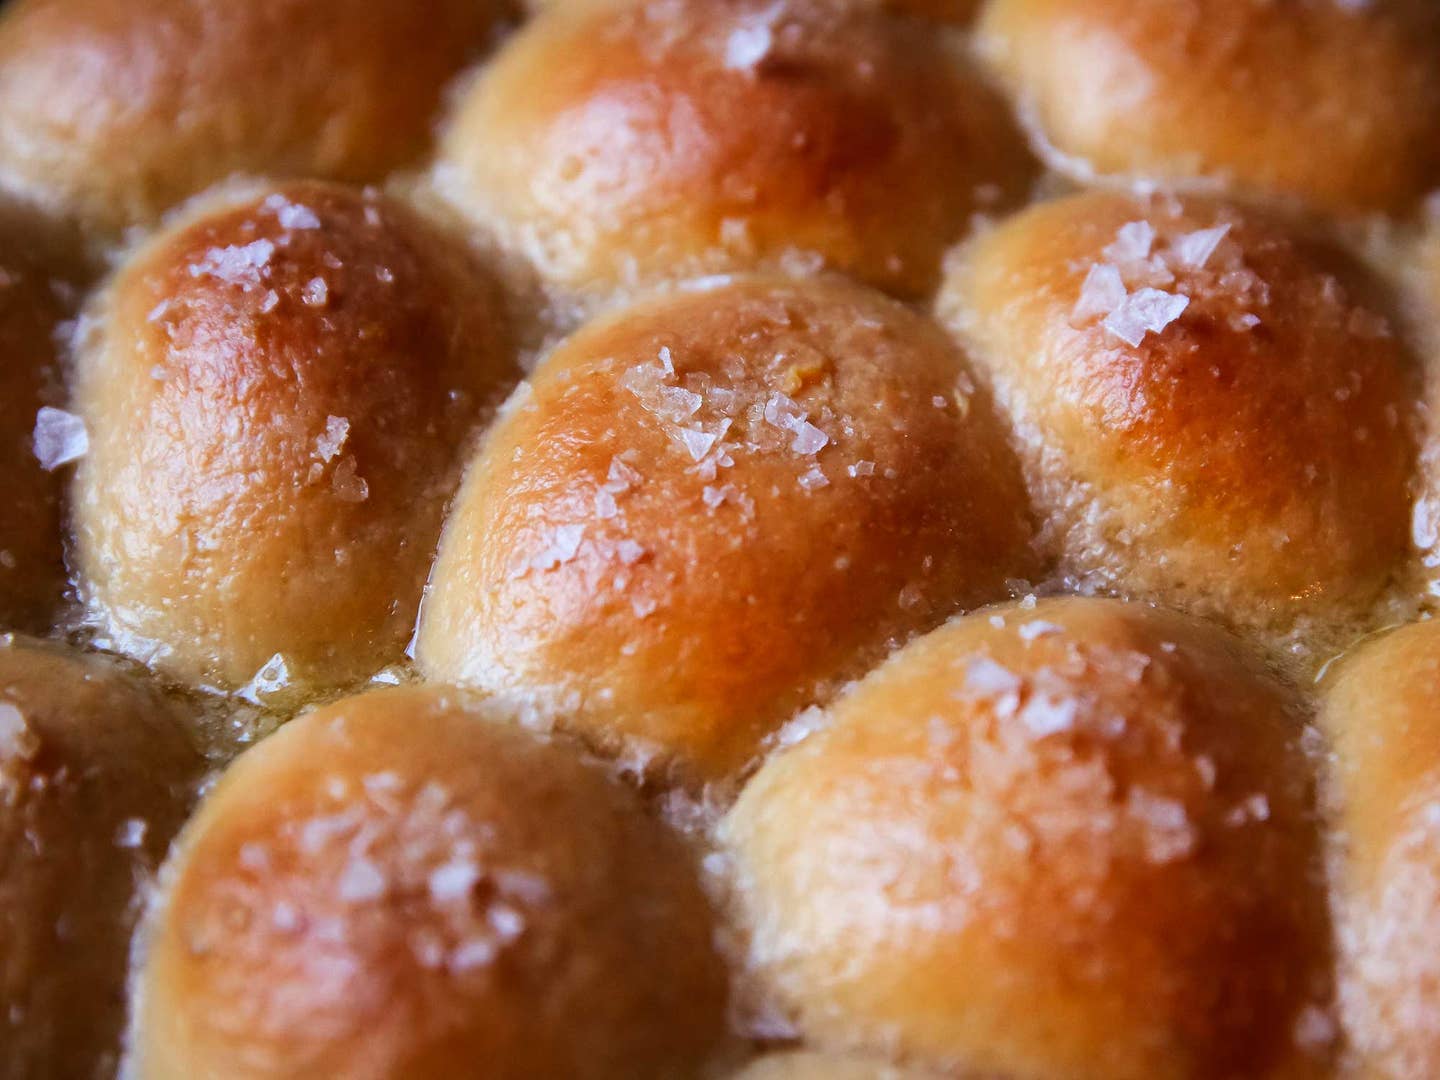 Colicchio & Sons’ Parker House Rolls